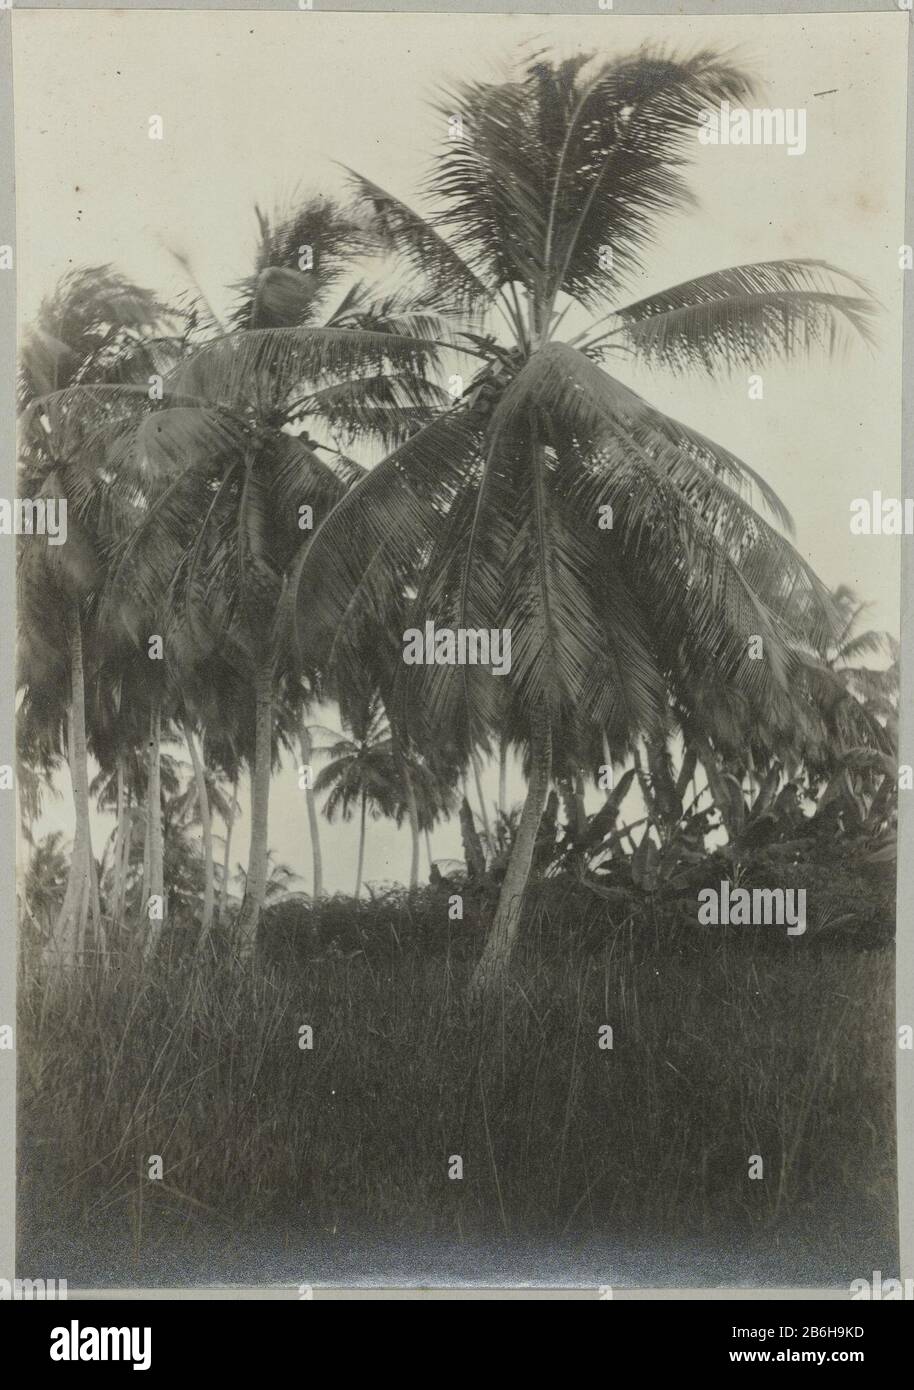 Coronie (title object) Coconut trees to Coronie. Part of the album Souvenir de Voyage (Part 2), about the life of the Doijer family in and around the plantation Ma Retraite in Suriname during the years 1906-1913. Manufacturer : Photographer: Hendrik Doijer (attributed to) Place manufacture: Suriname Date: 1906 - 1913 Physical features: gelatin silver print material: paper Technique: gelatin silver print dimensions: photo: h 175 mm × W 122 mm Date: 1906 - 1913 Stock Photo